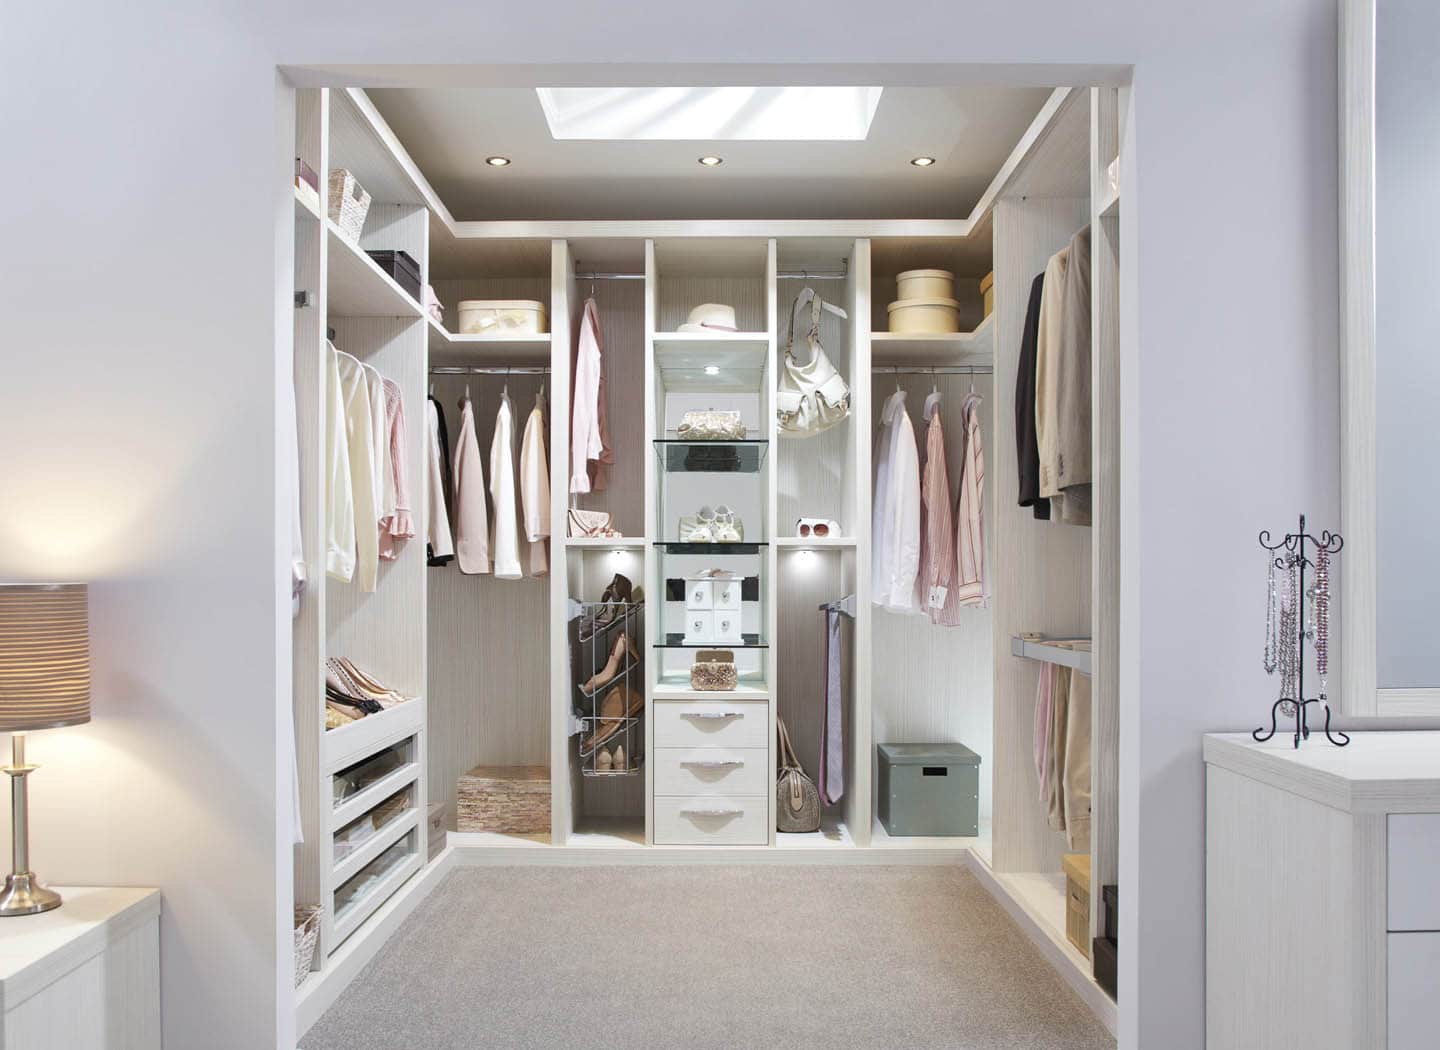 His and hers walk-in wardrobes